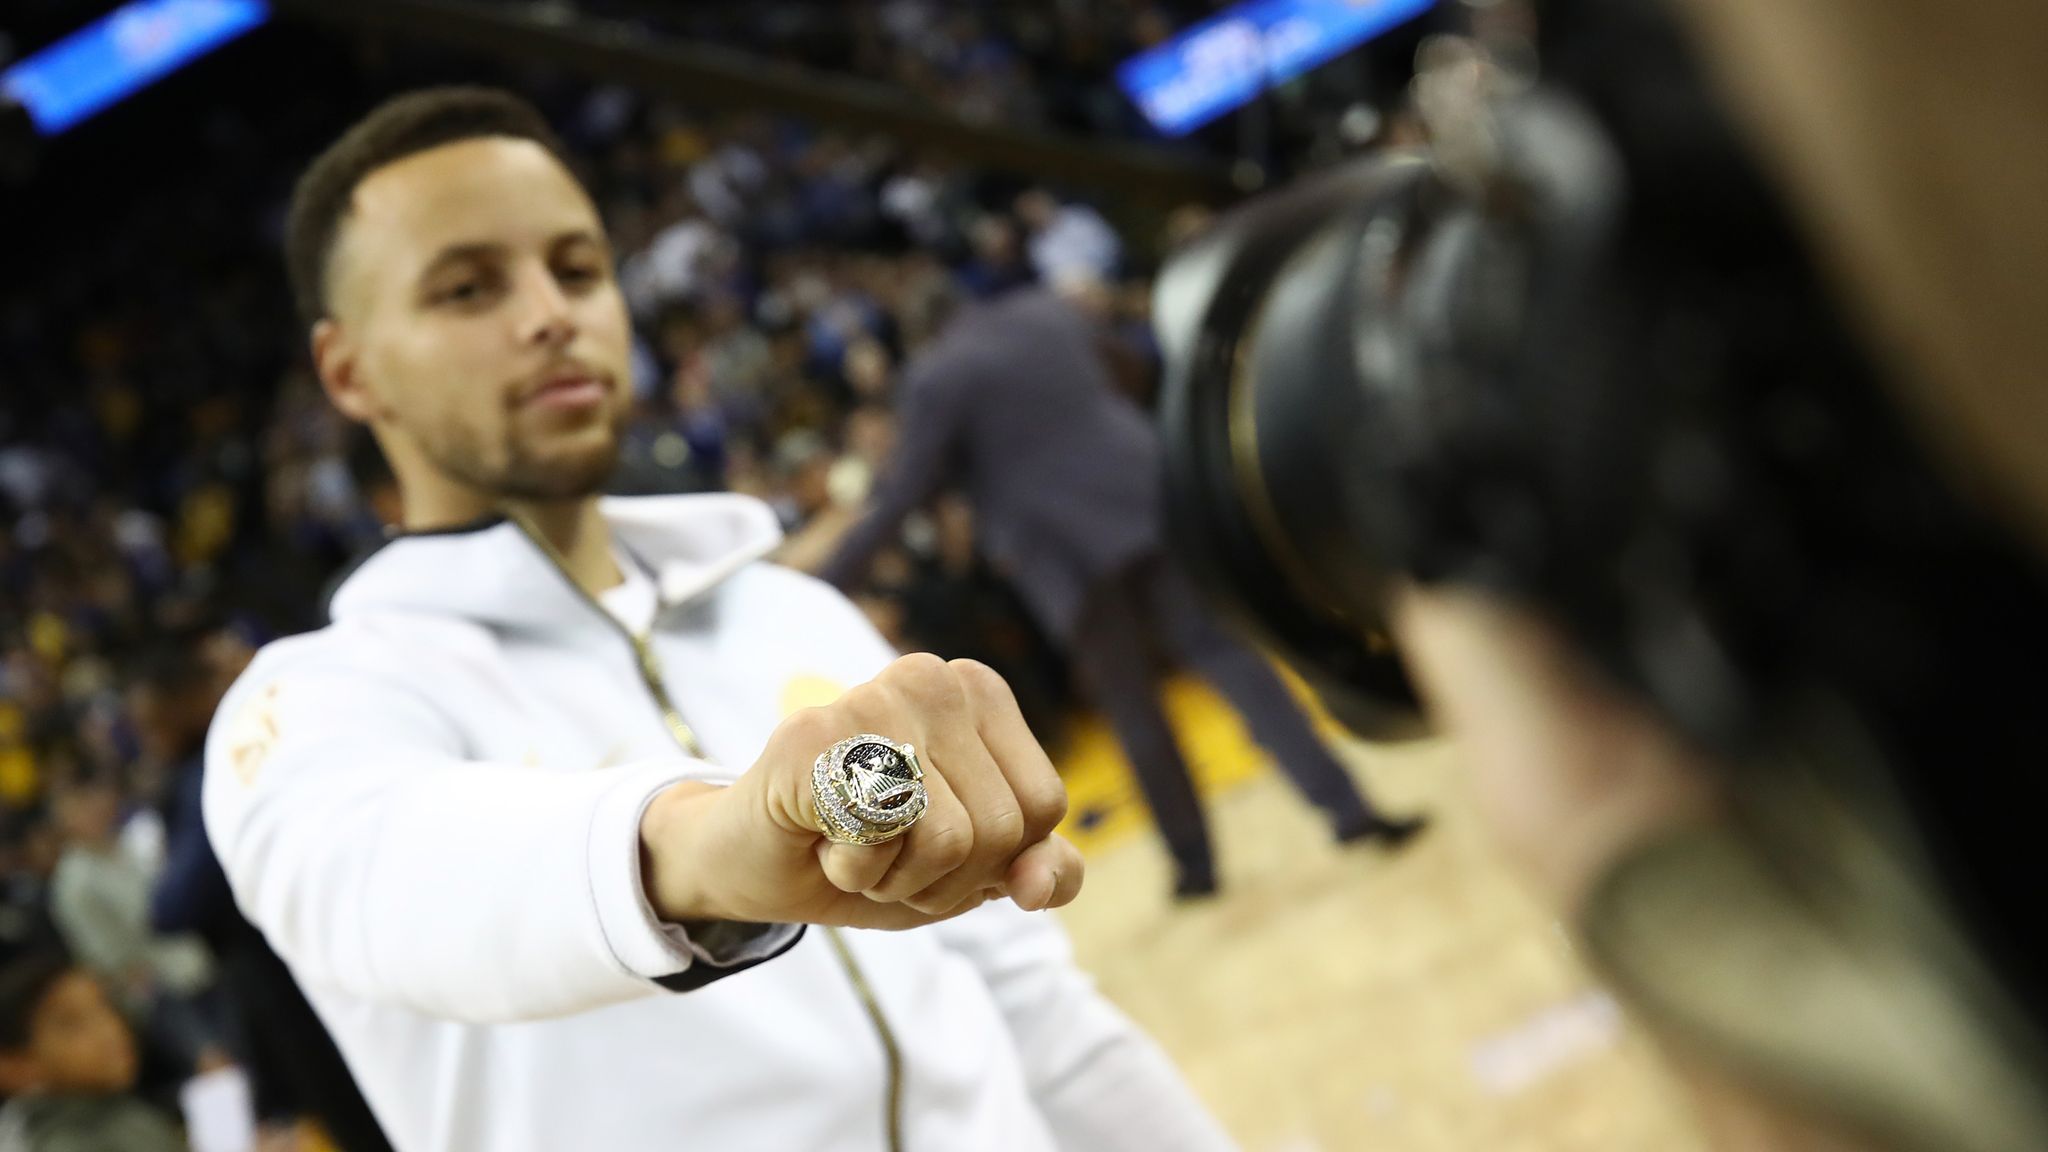 How to watch Warriors championship ring ceremony: TV channel, time